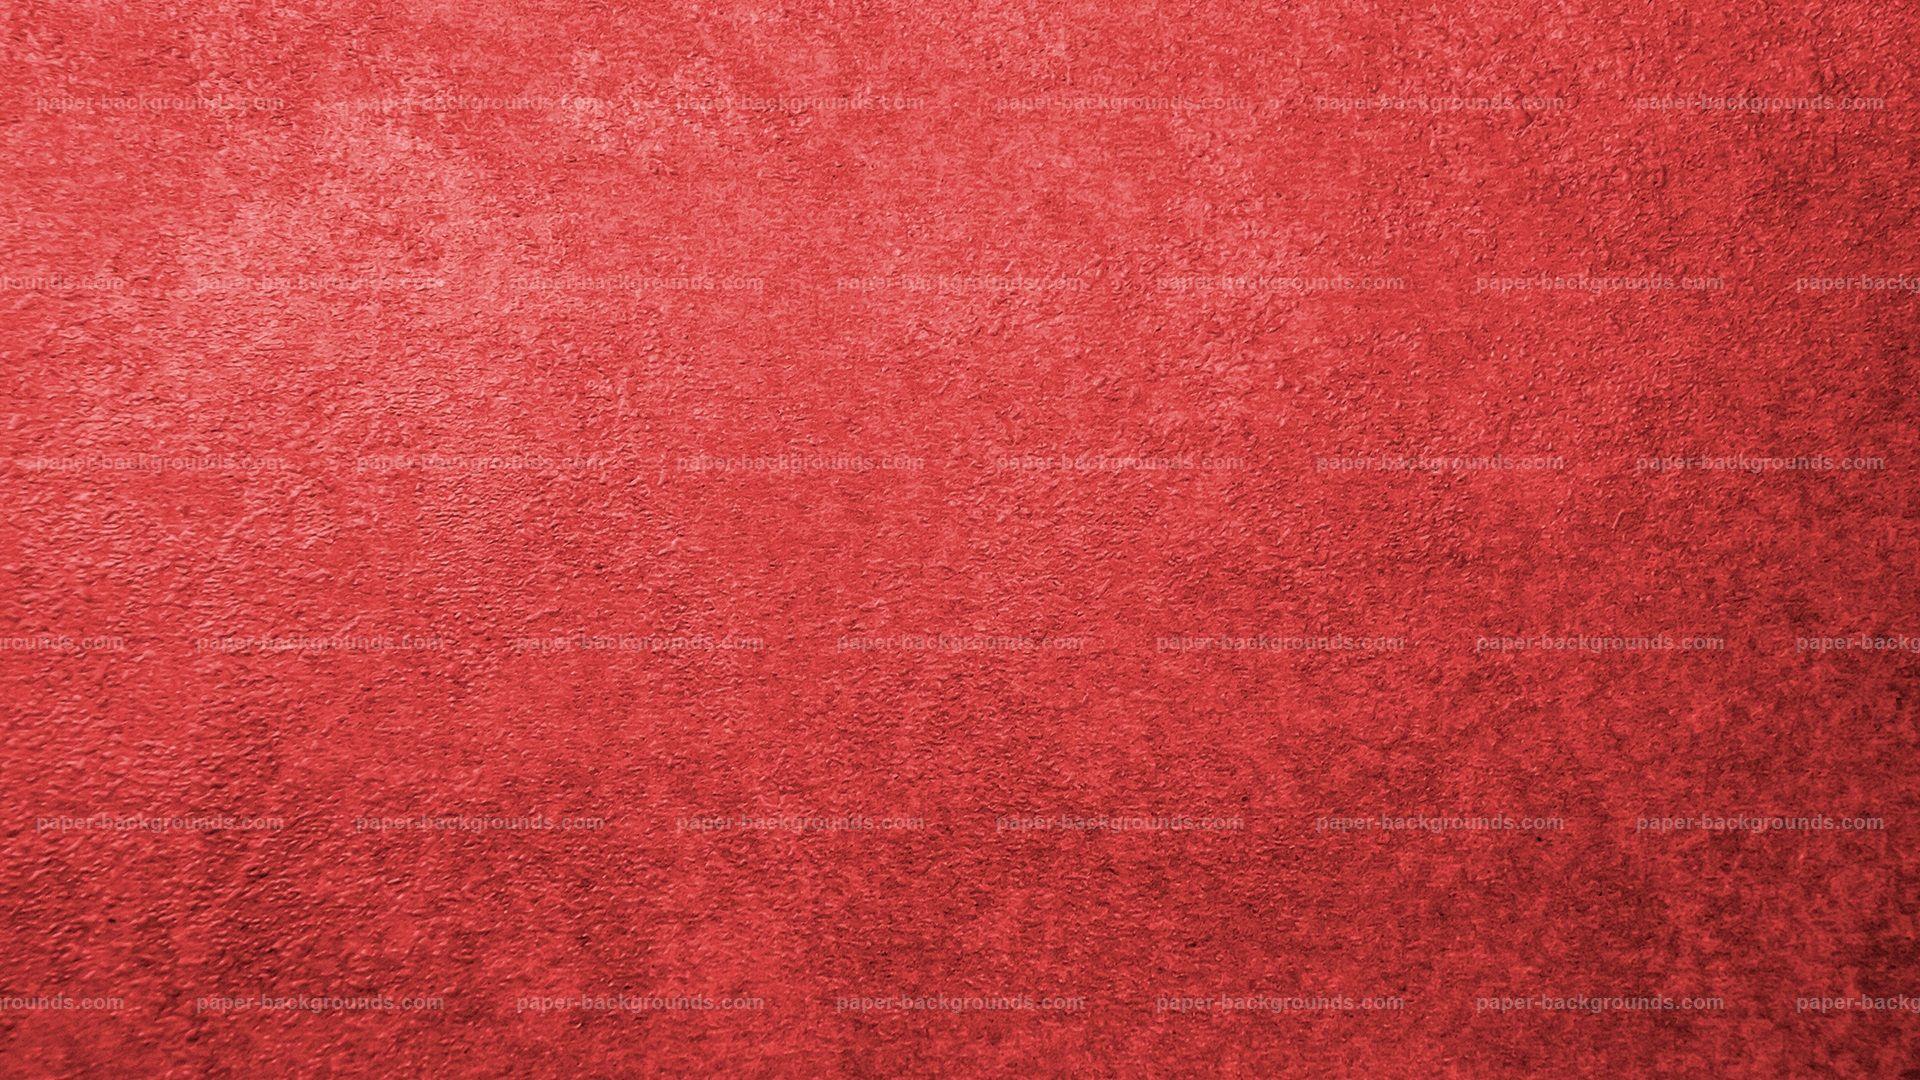 Plain Red Background Hd Wallpaper - Red Sparkle Vinyl , HD Wallpaper & Backgrounds